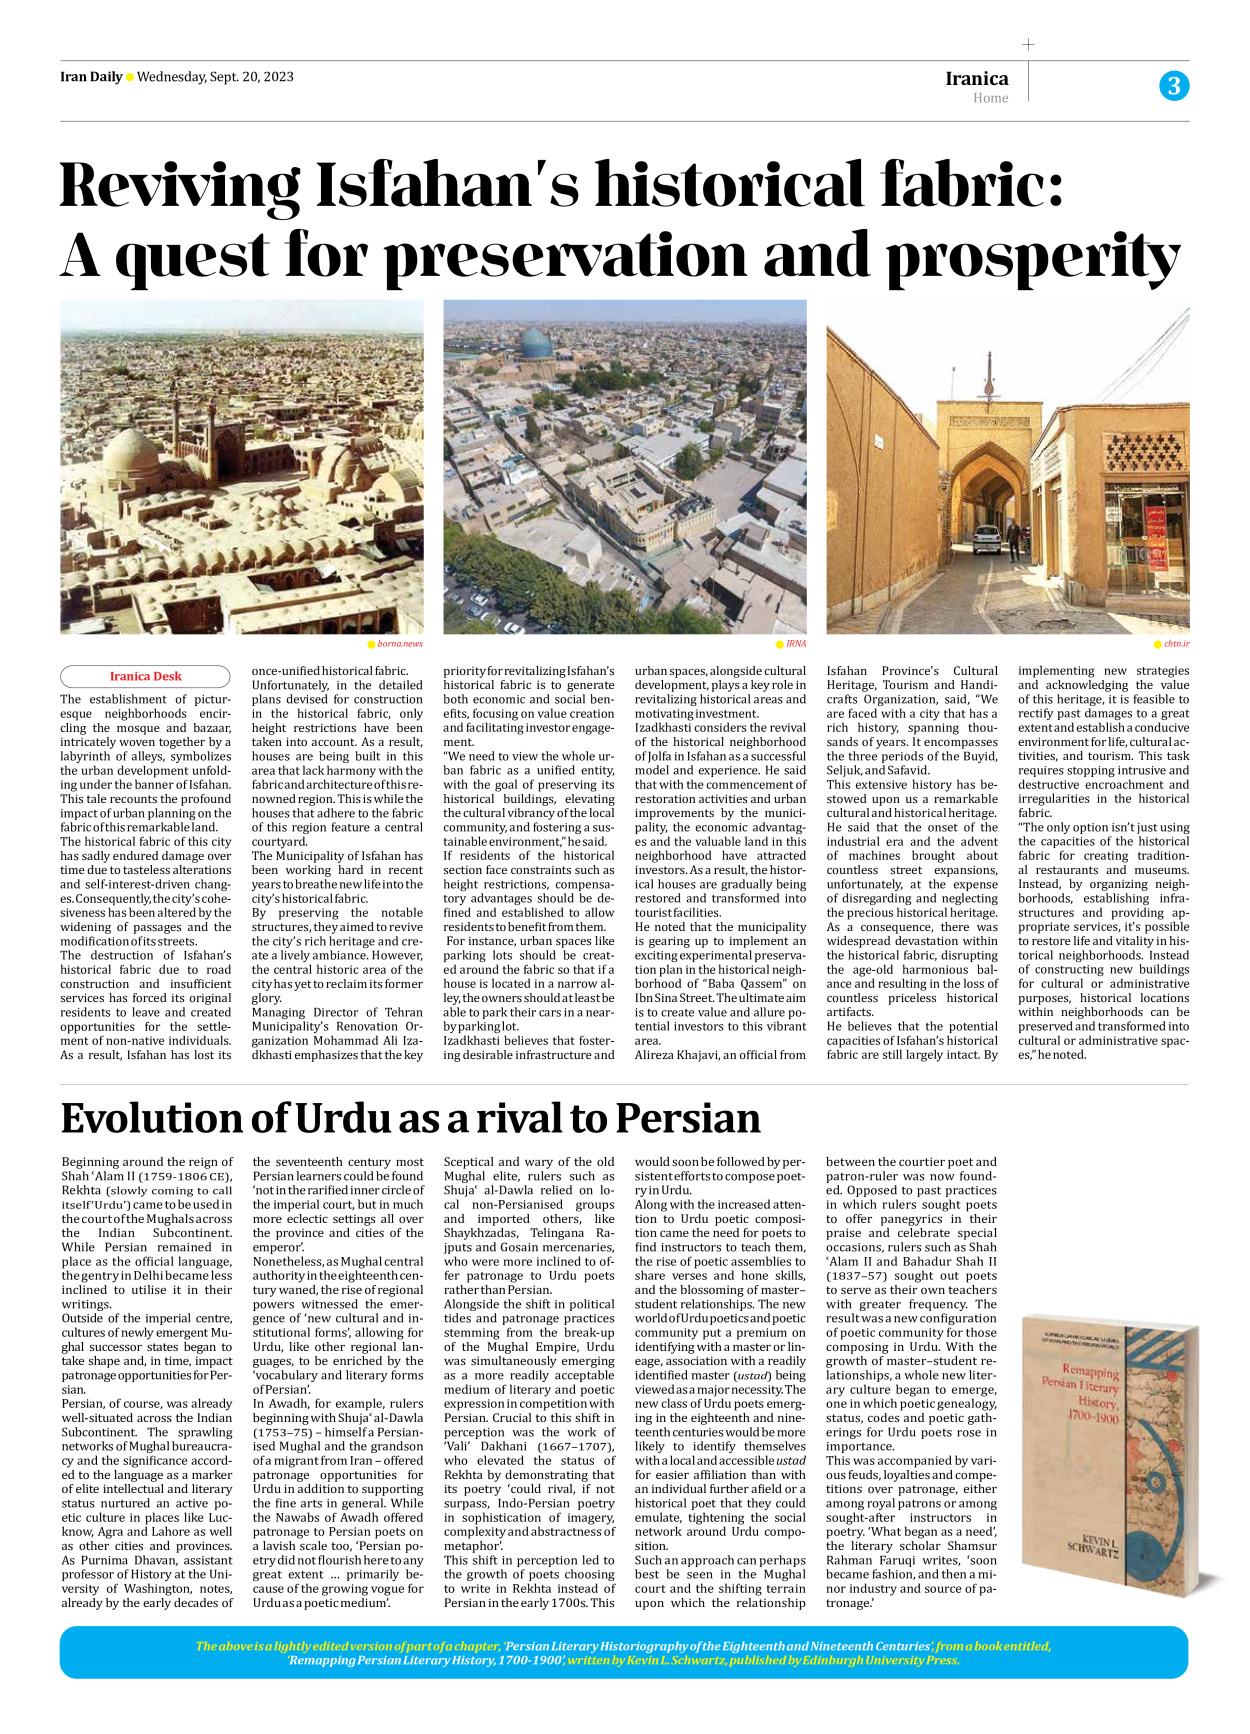 Iran Daily - Number Seven Thousand Three Hundred and Ninety - 20 September 2023 - Page 3